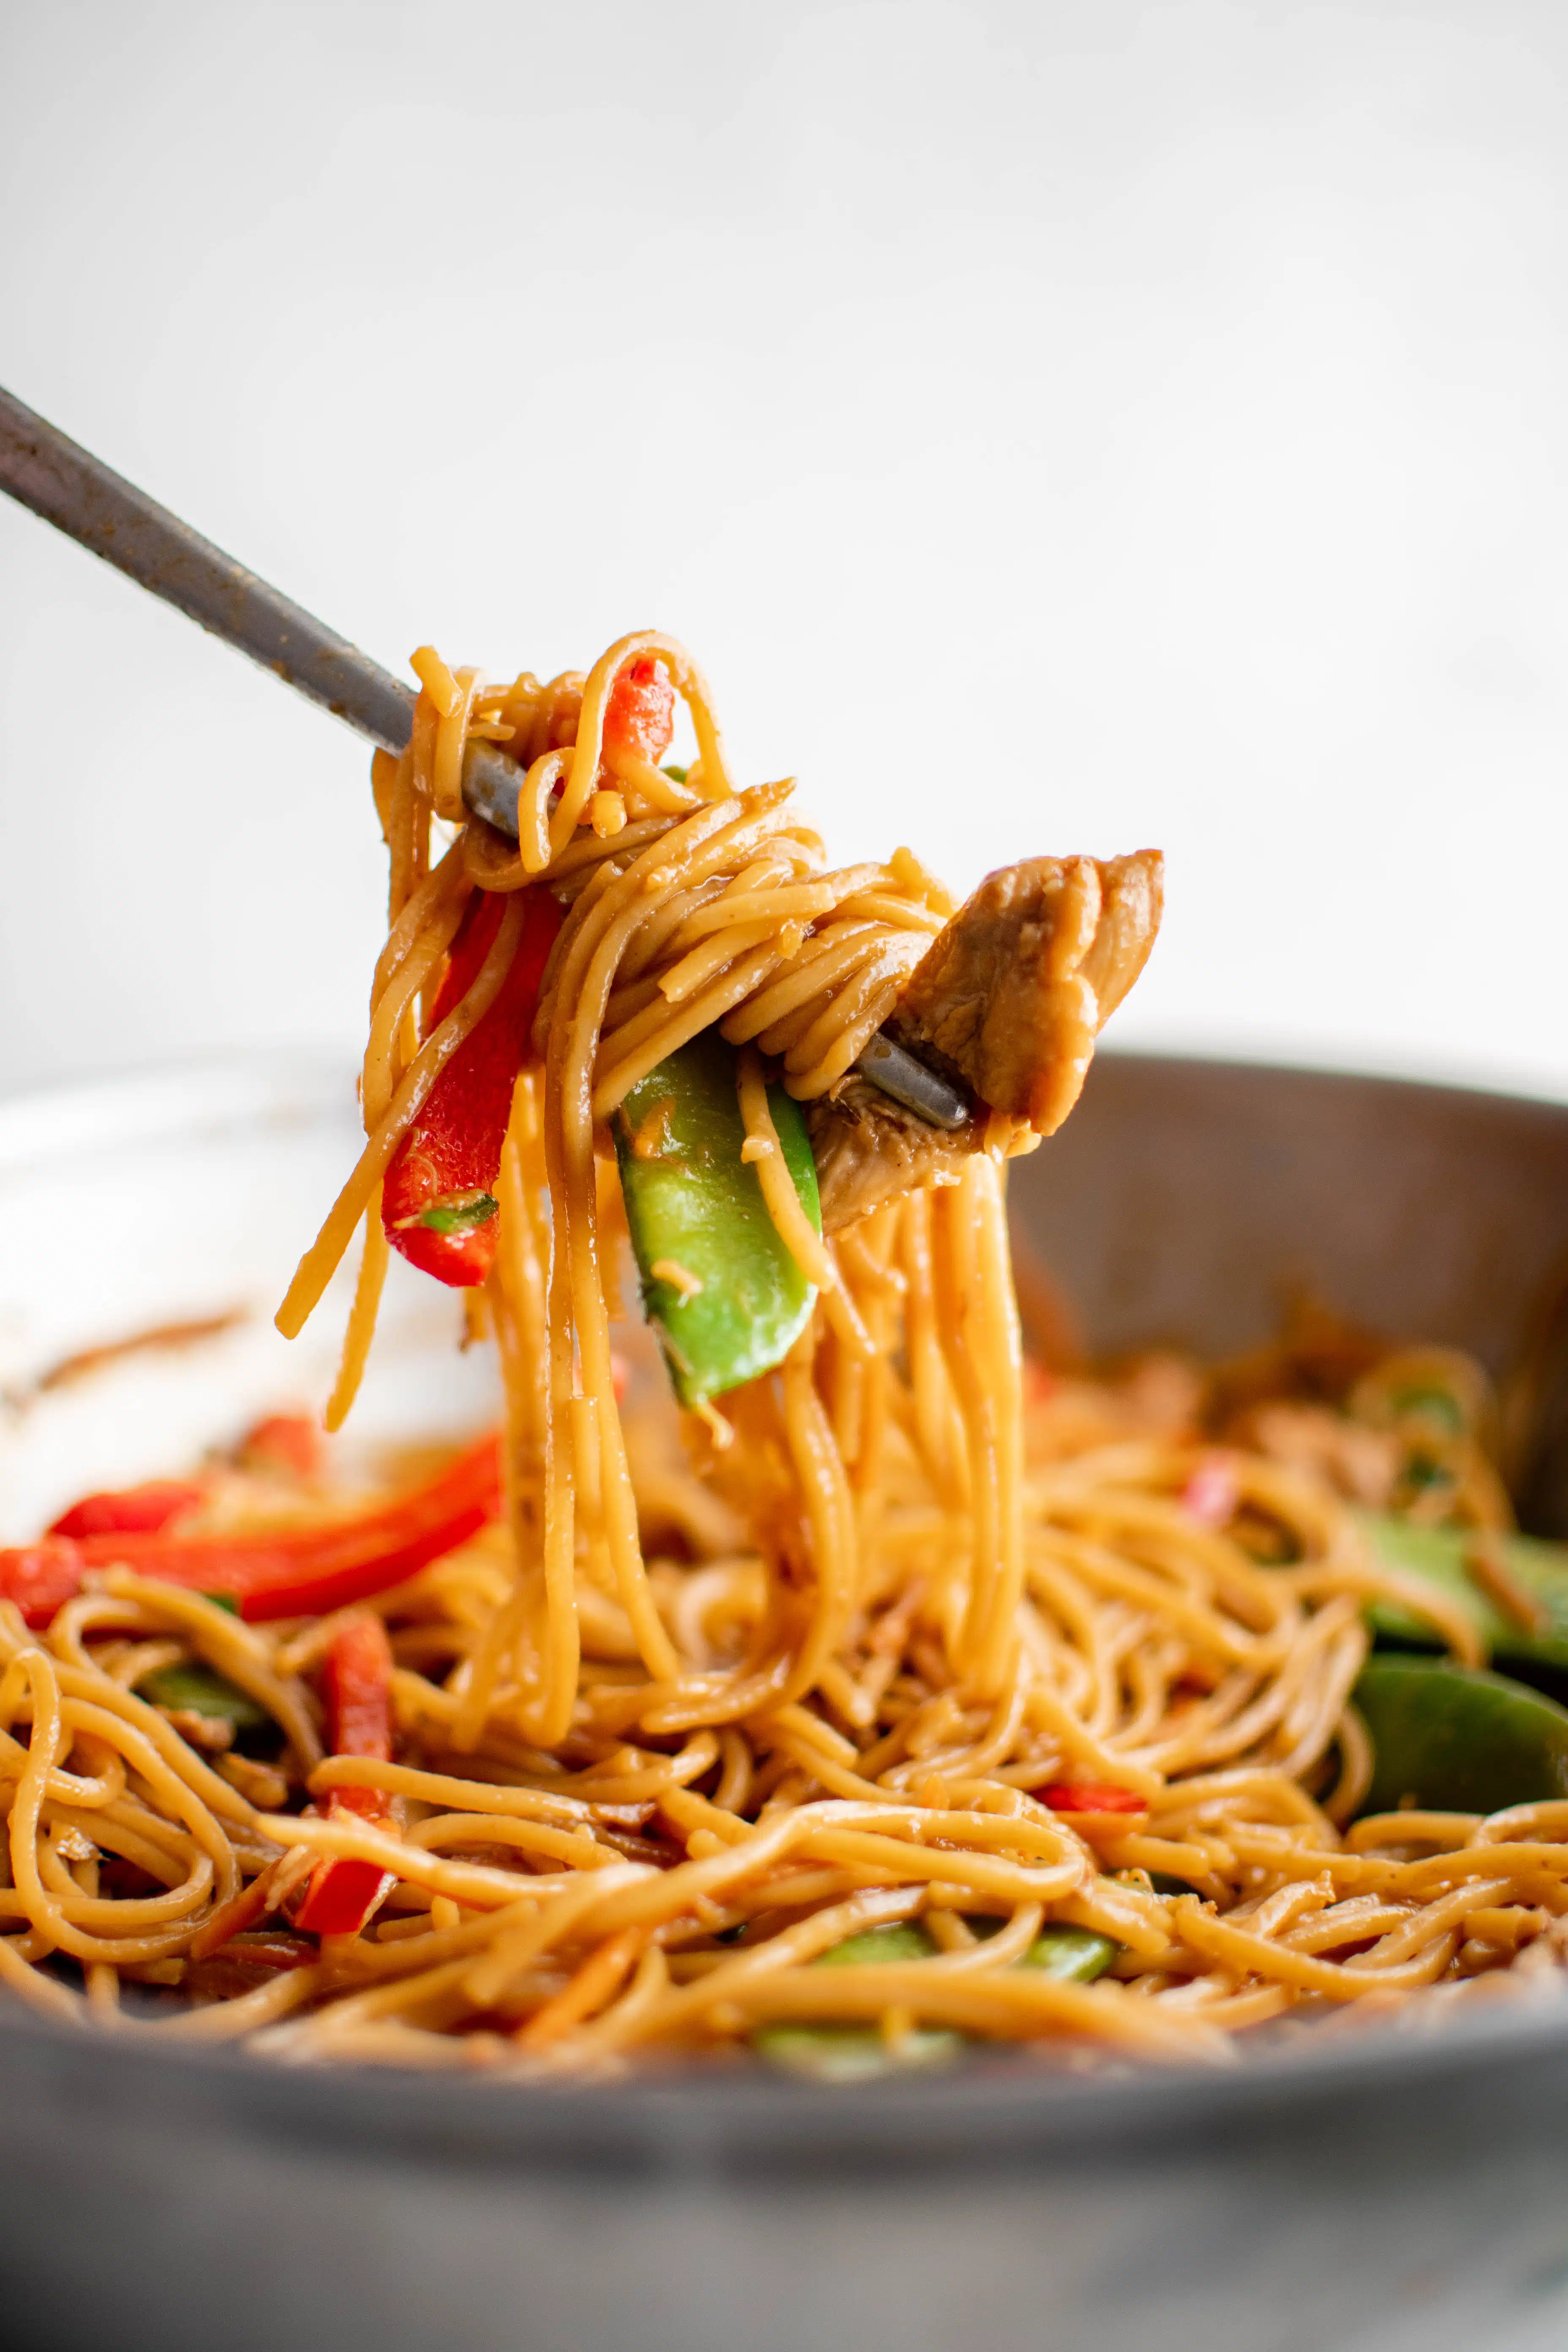 Large metal chopsticks carefully removing a large scoop of chow mein with vegetables and chicken from a steel wok.